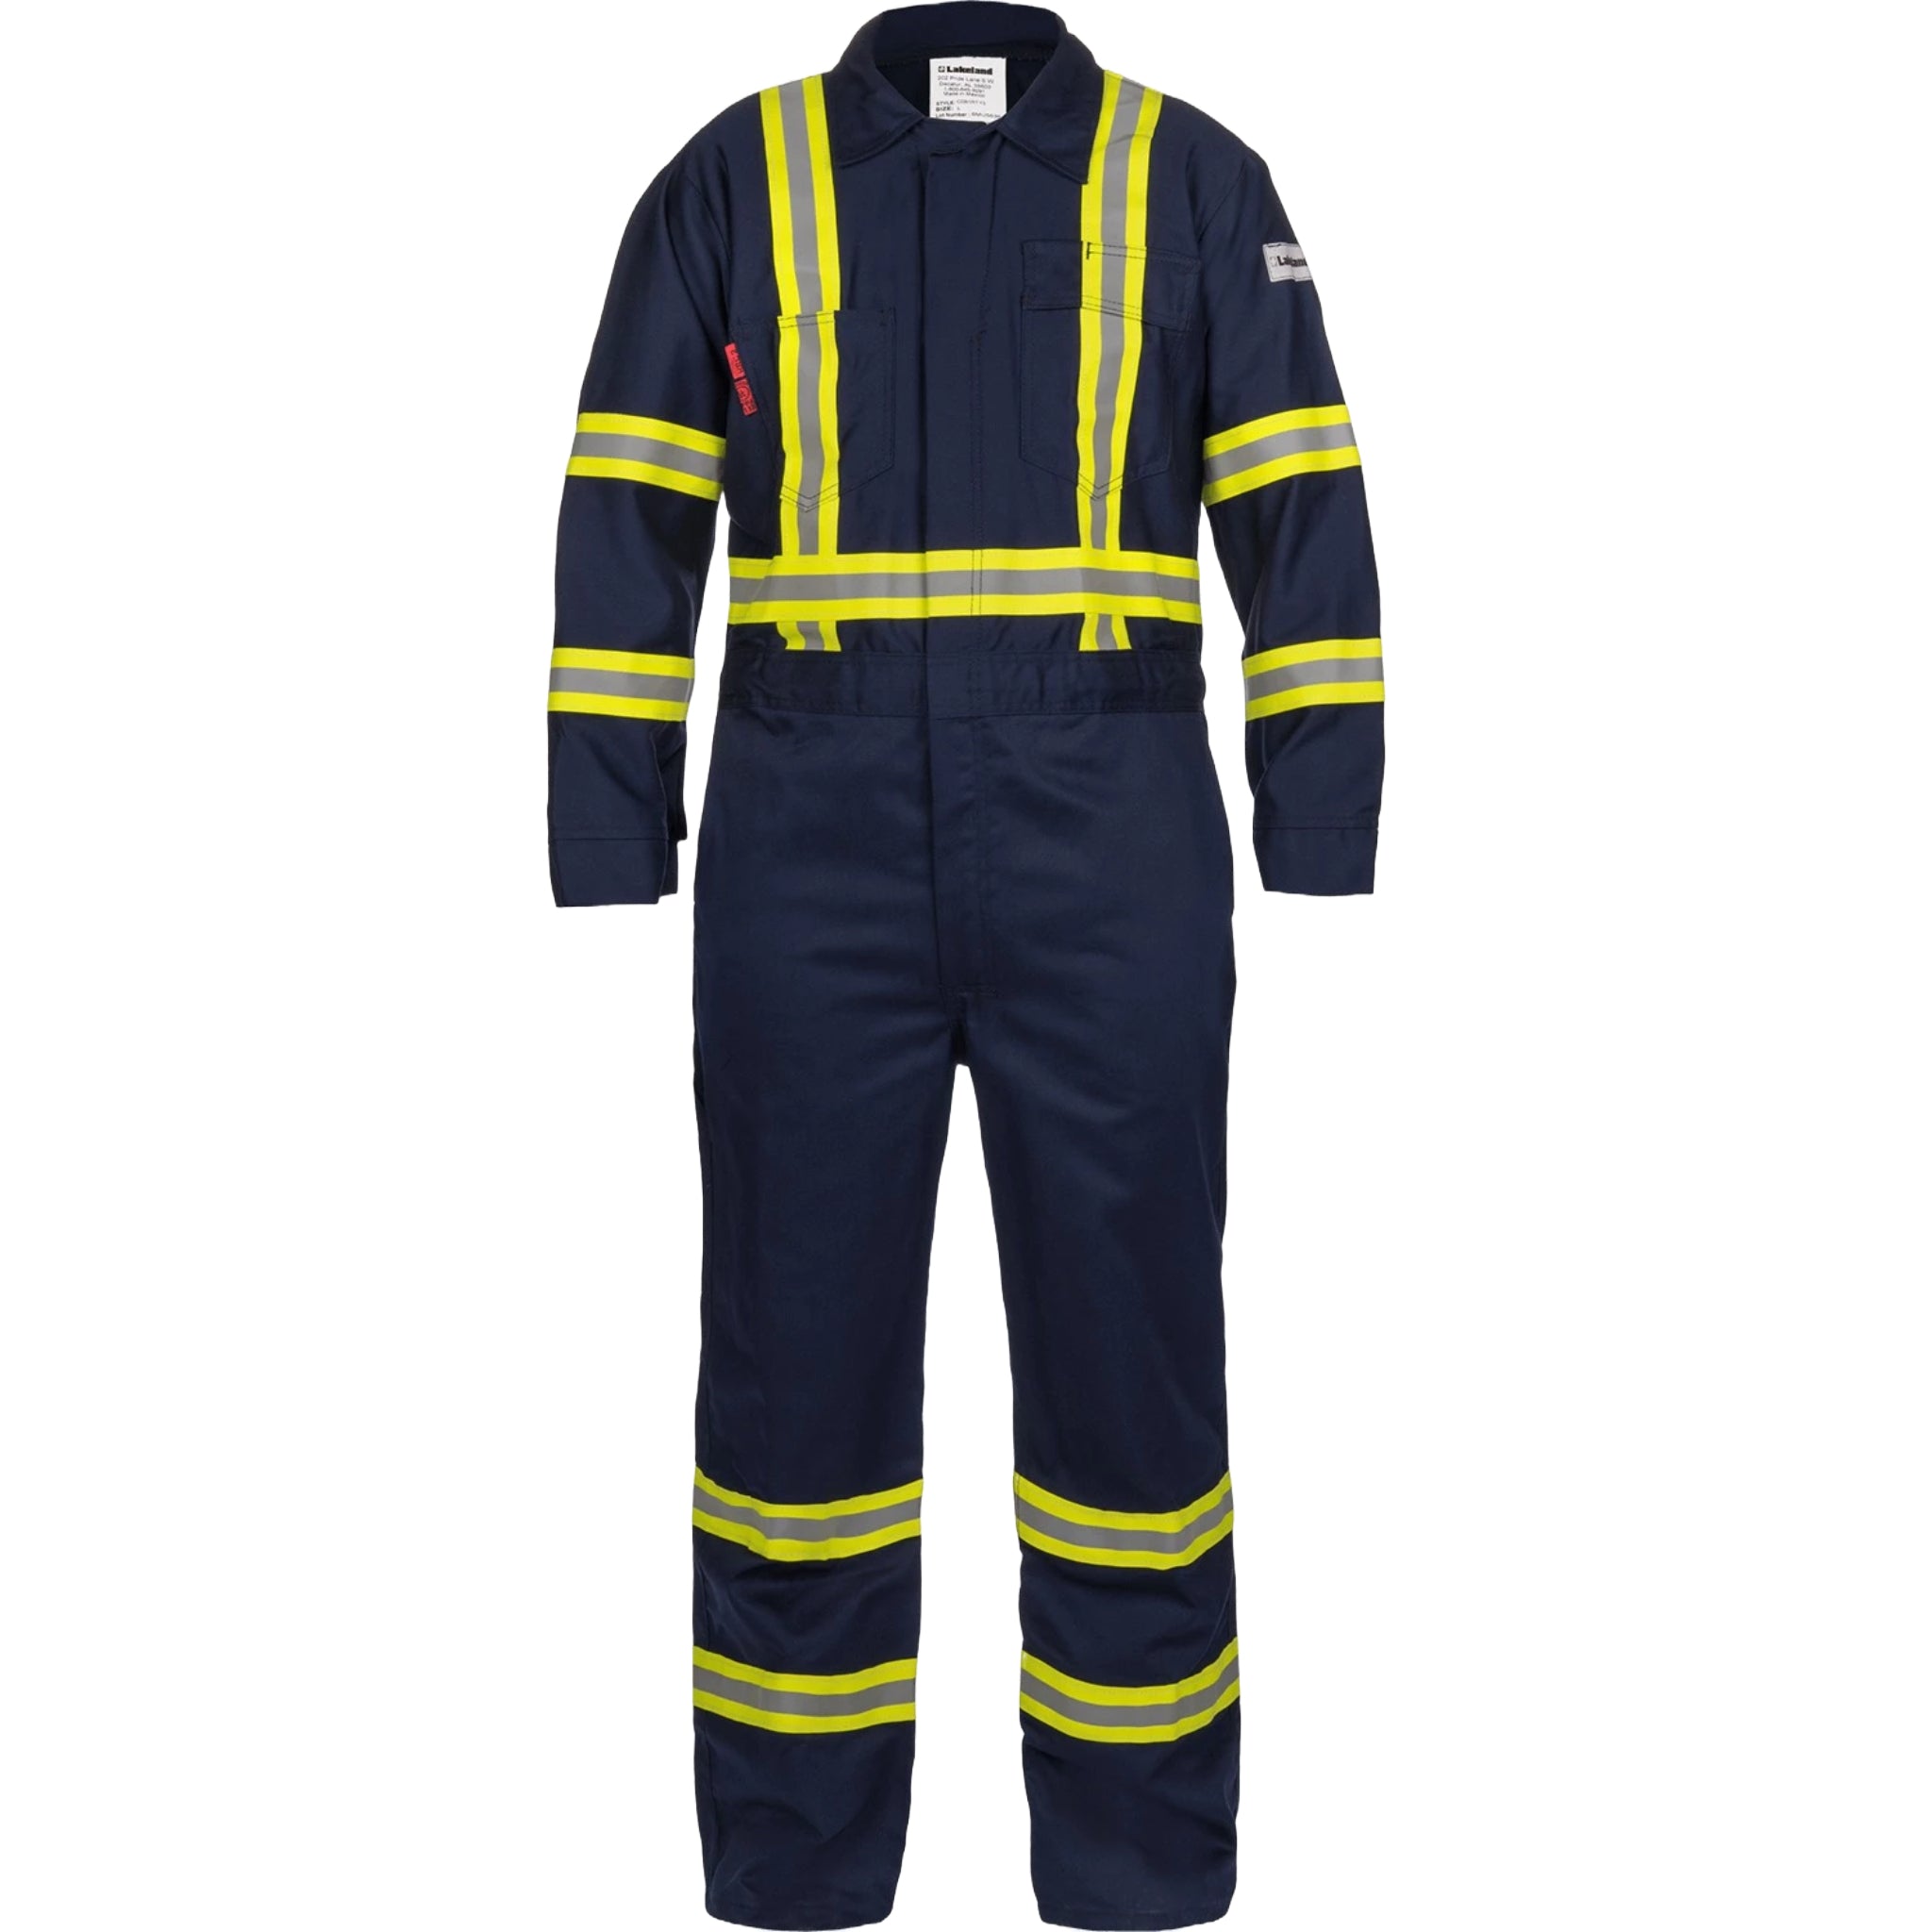 LAKELAND C071RT13 FR Coverall, 88/12 7 oz. Cotton, Navy with Reflective, 1 Each